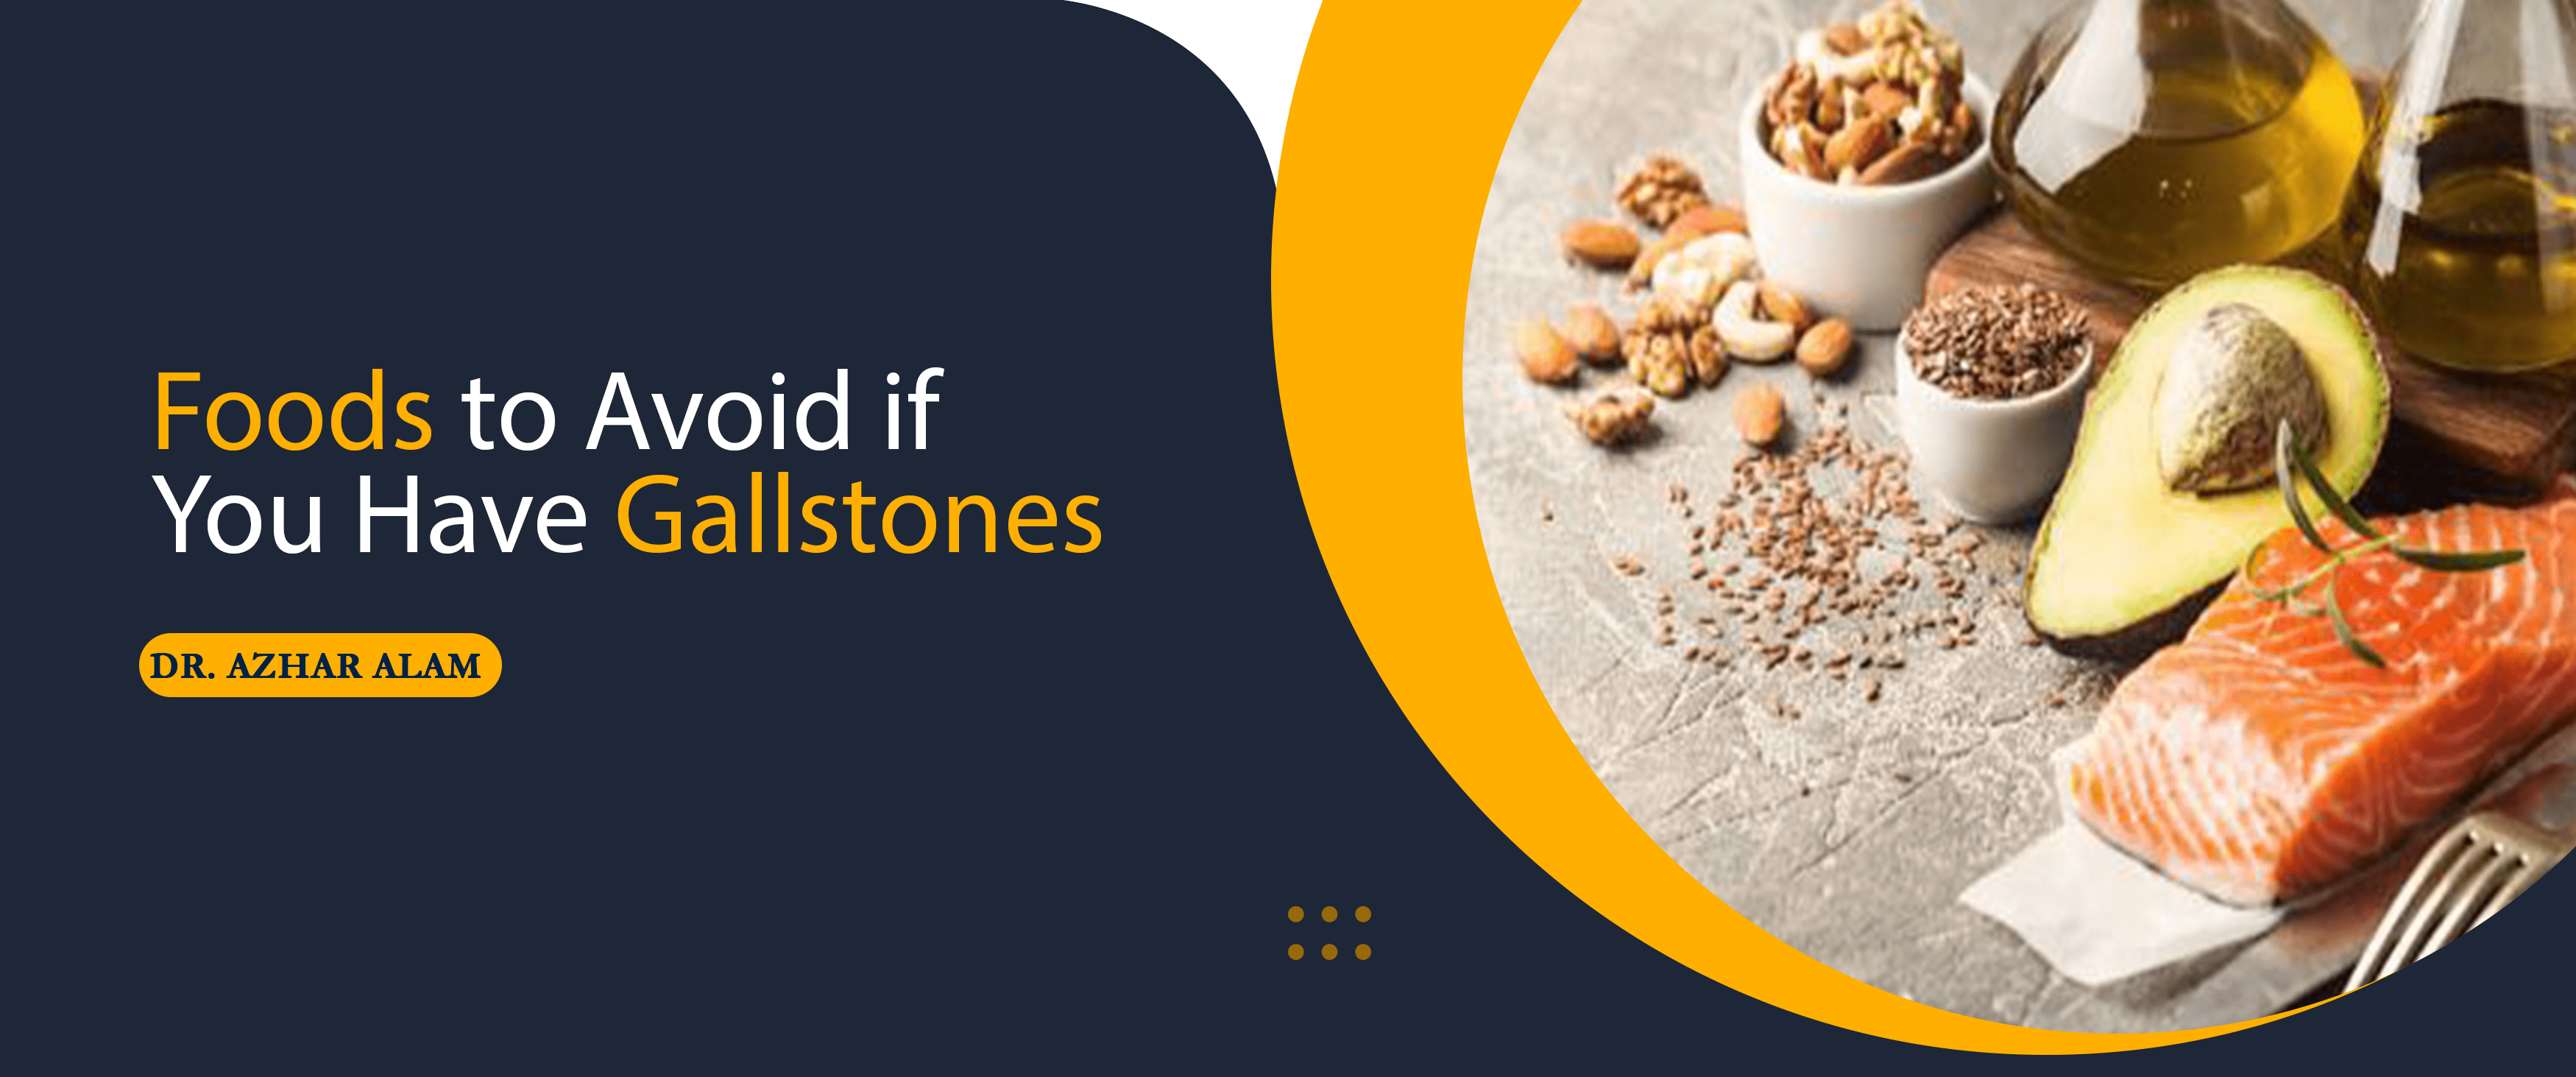 Foods to Avoid if You Have Gallstones